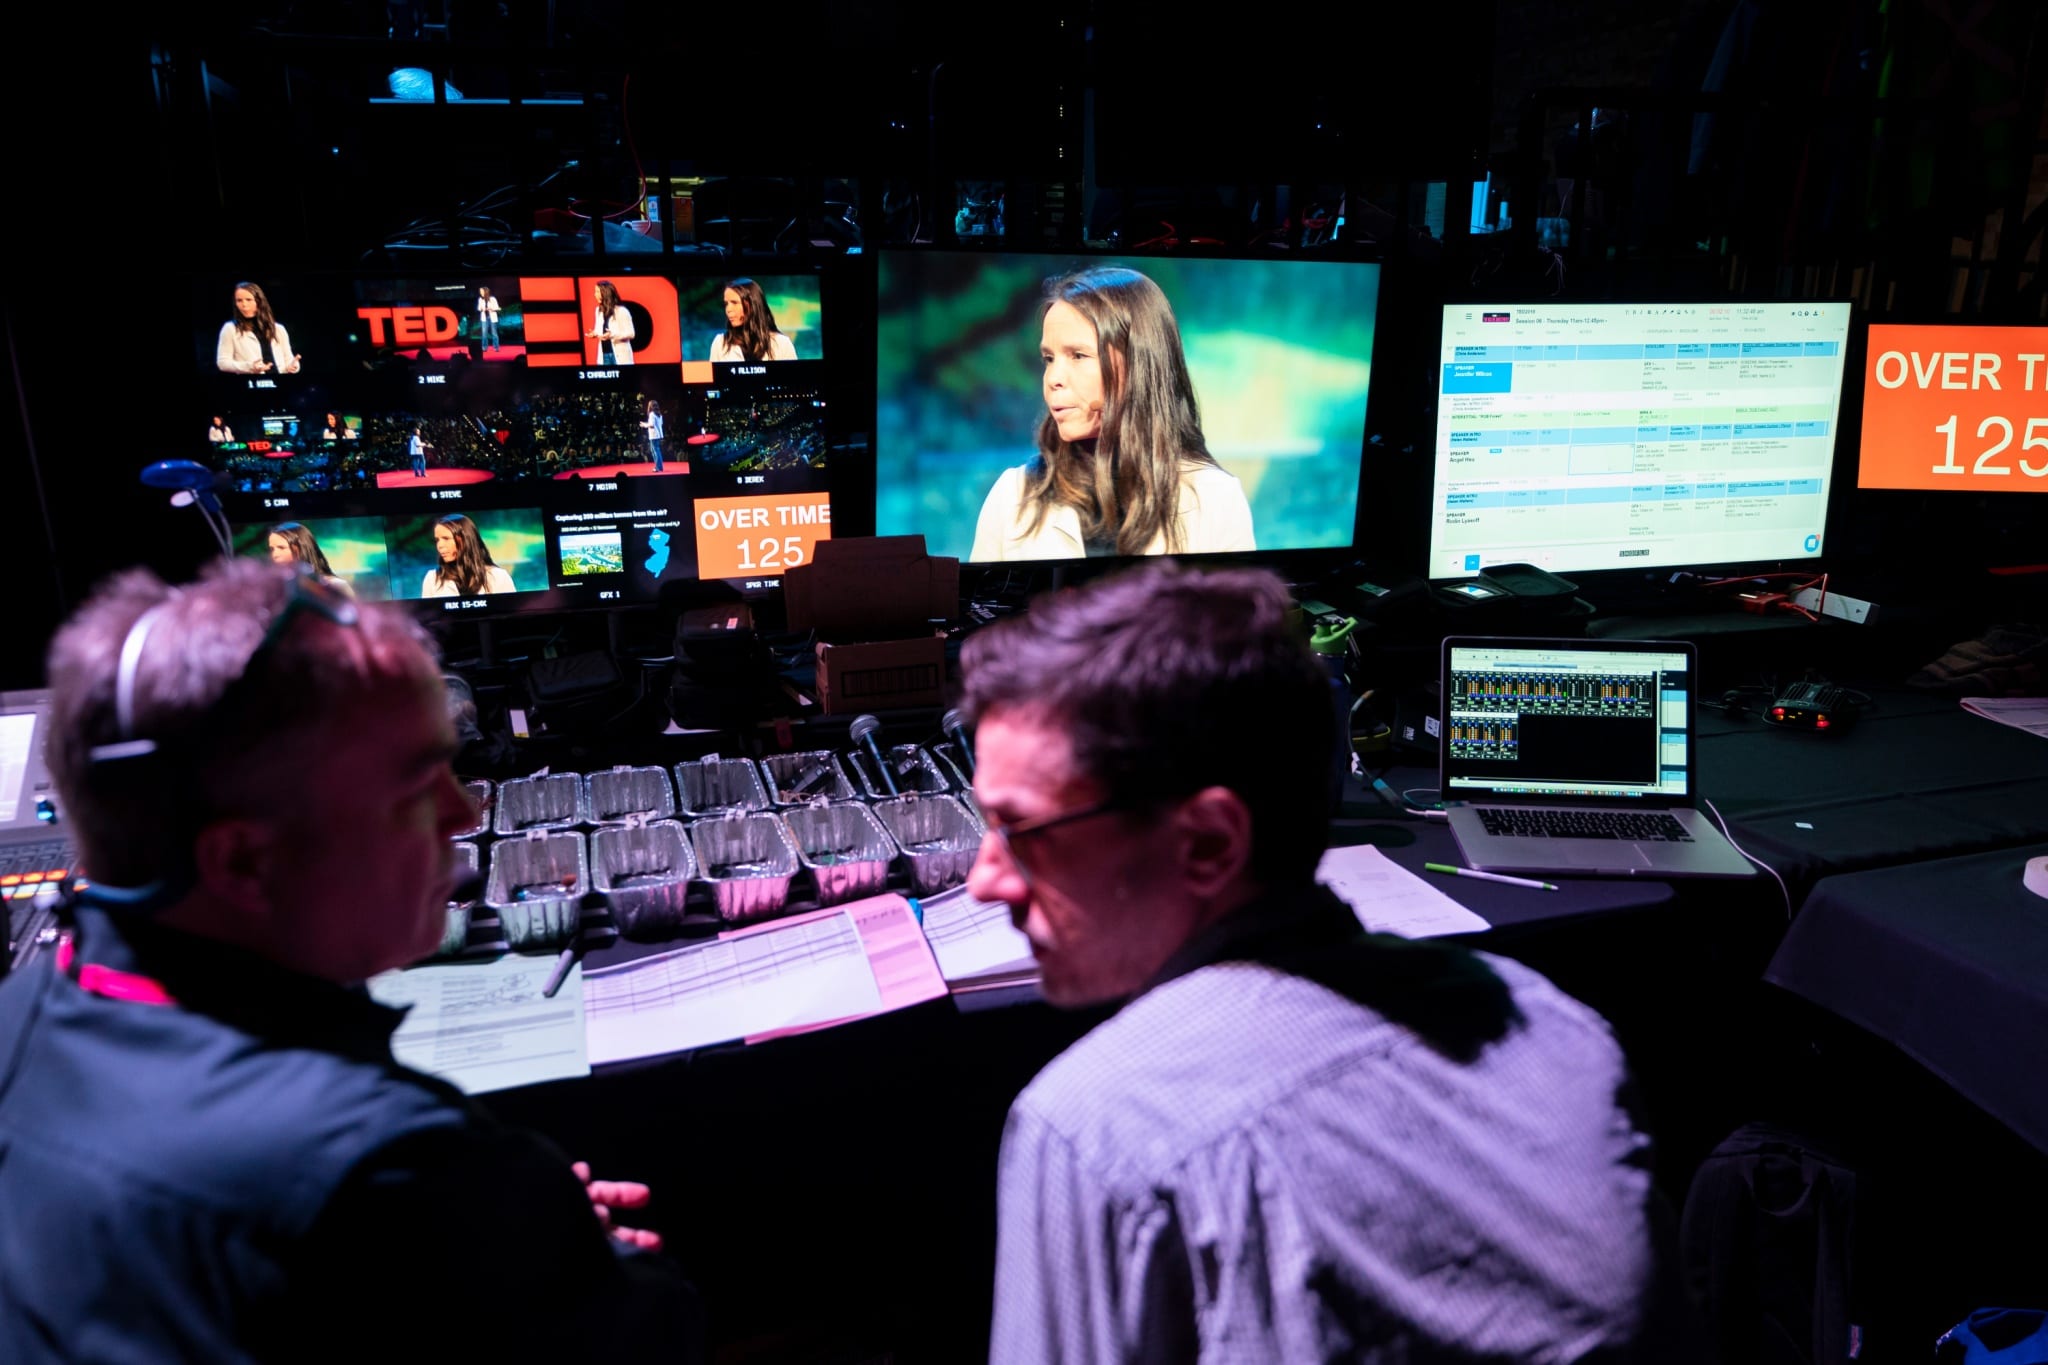 The event production crew at TED 2018